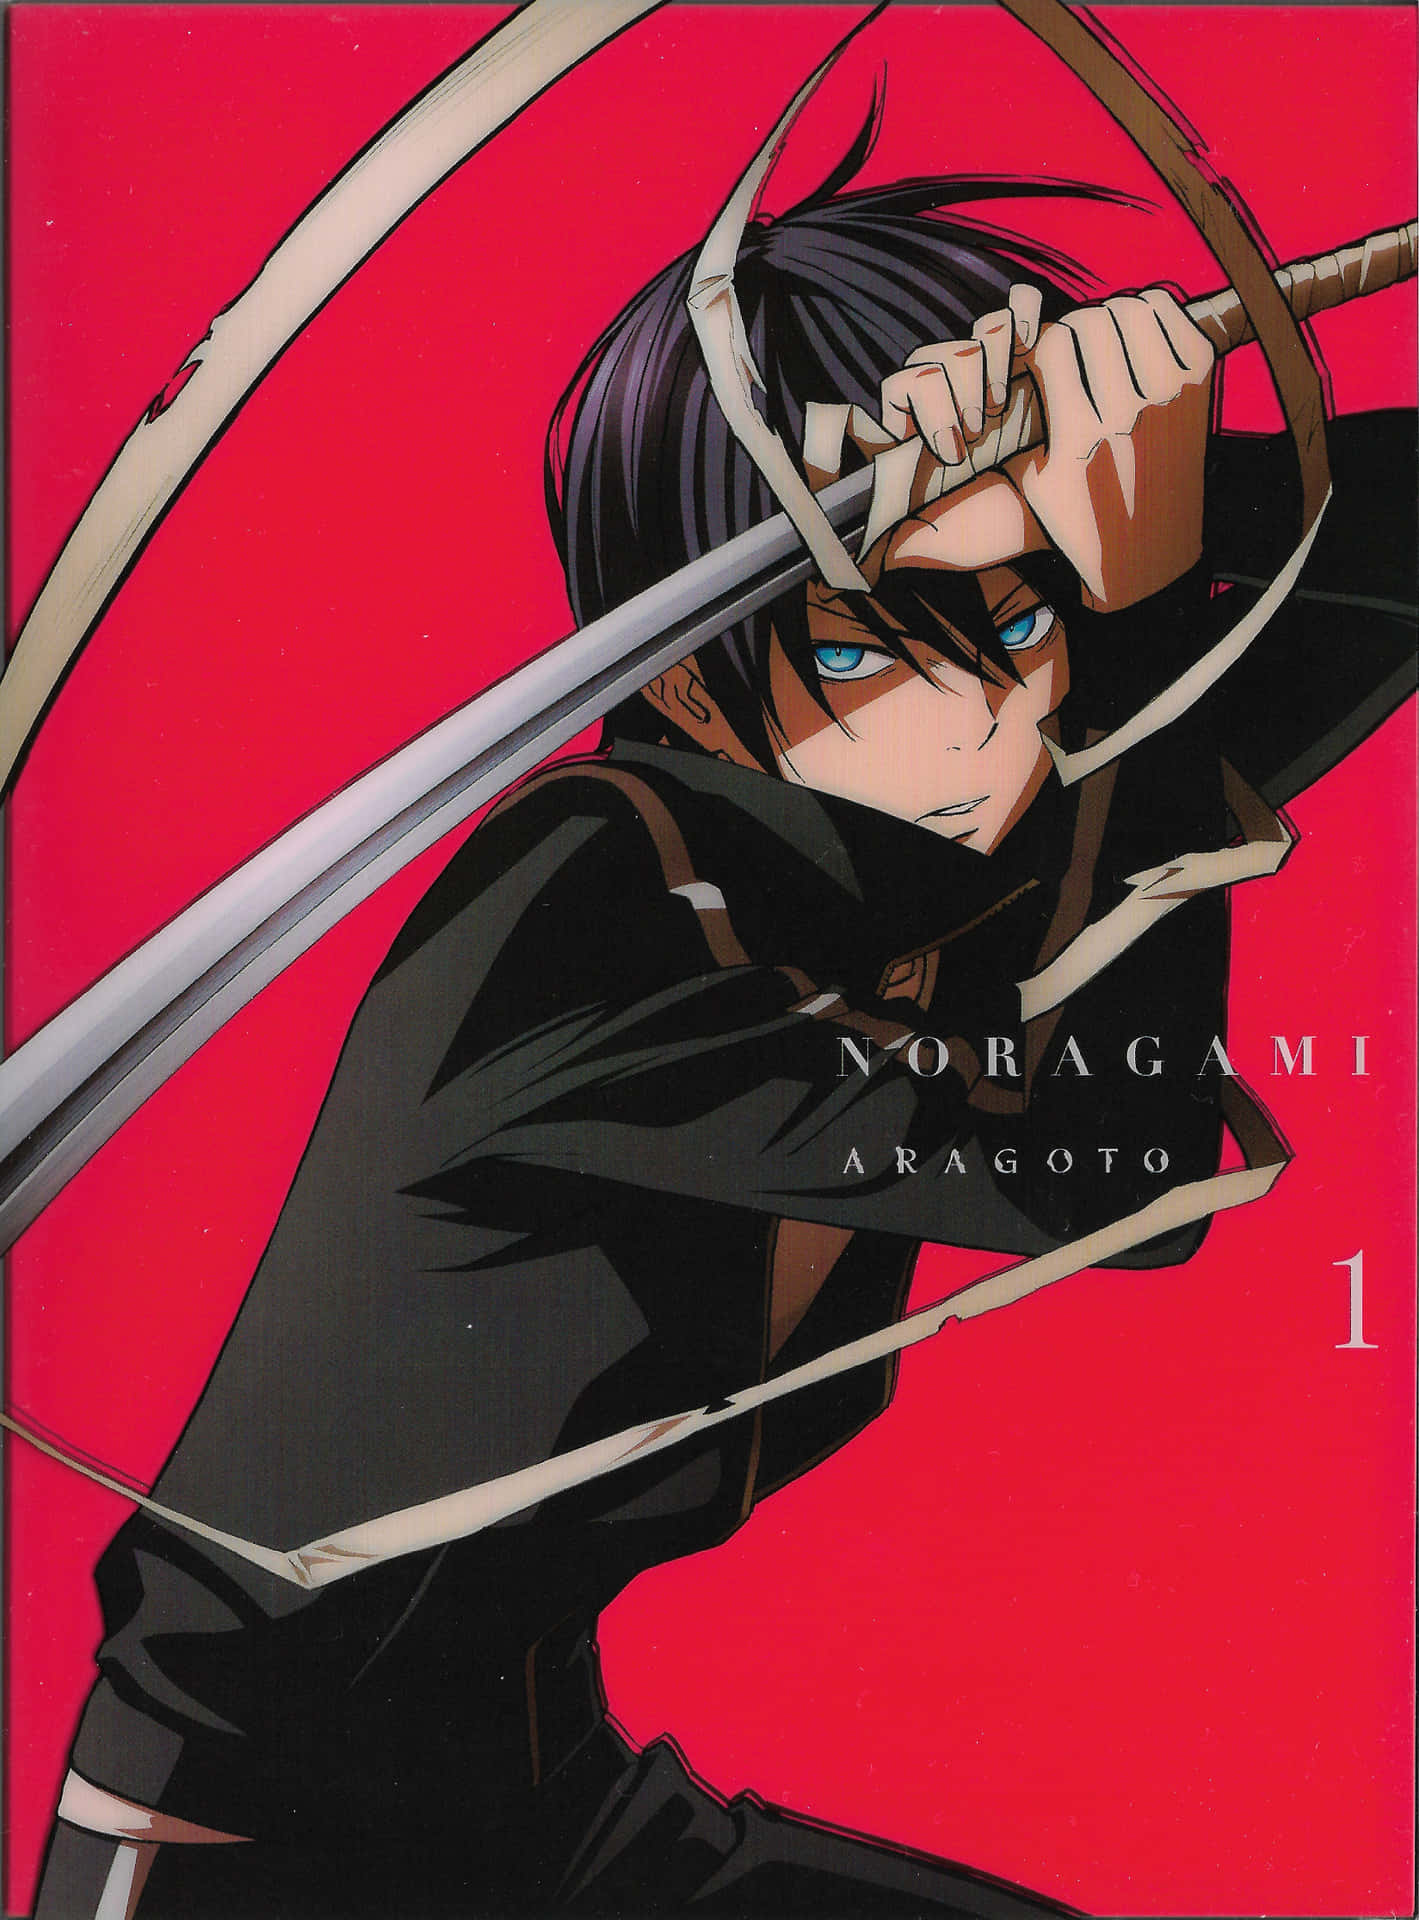 ZHDP Anime Noragami Bishamon Poster Canvas Art Poster and Wall Art Picture  Print Modern Family Bedroom Decor Posters 08x12inch(20x30cm) : Amazon.ca:  Home